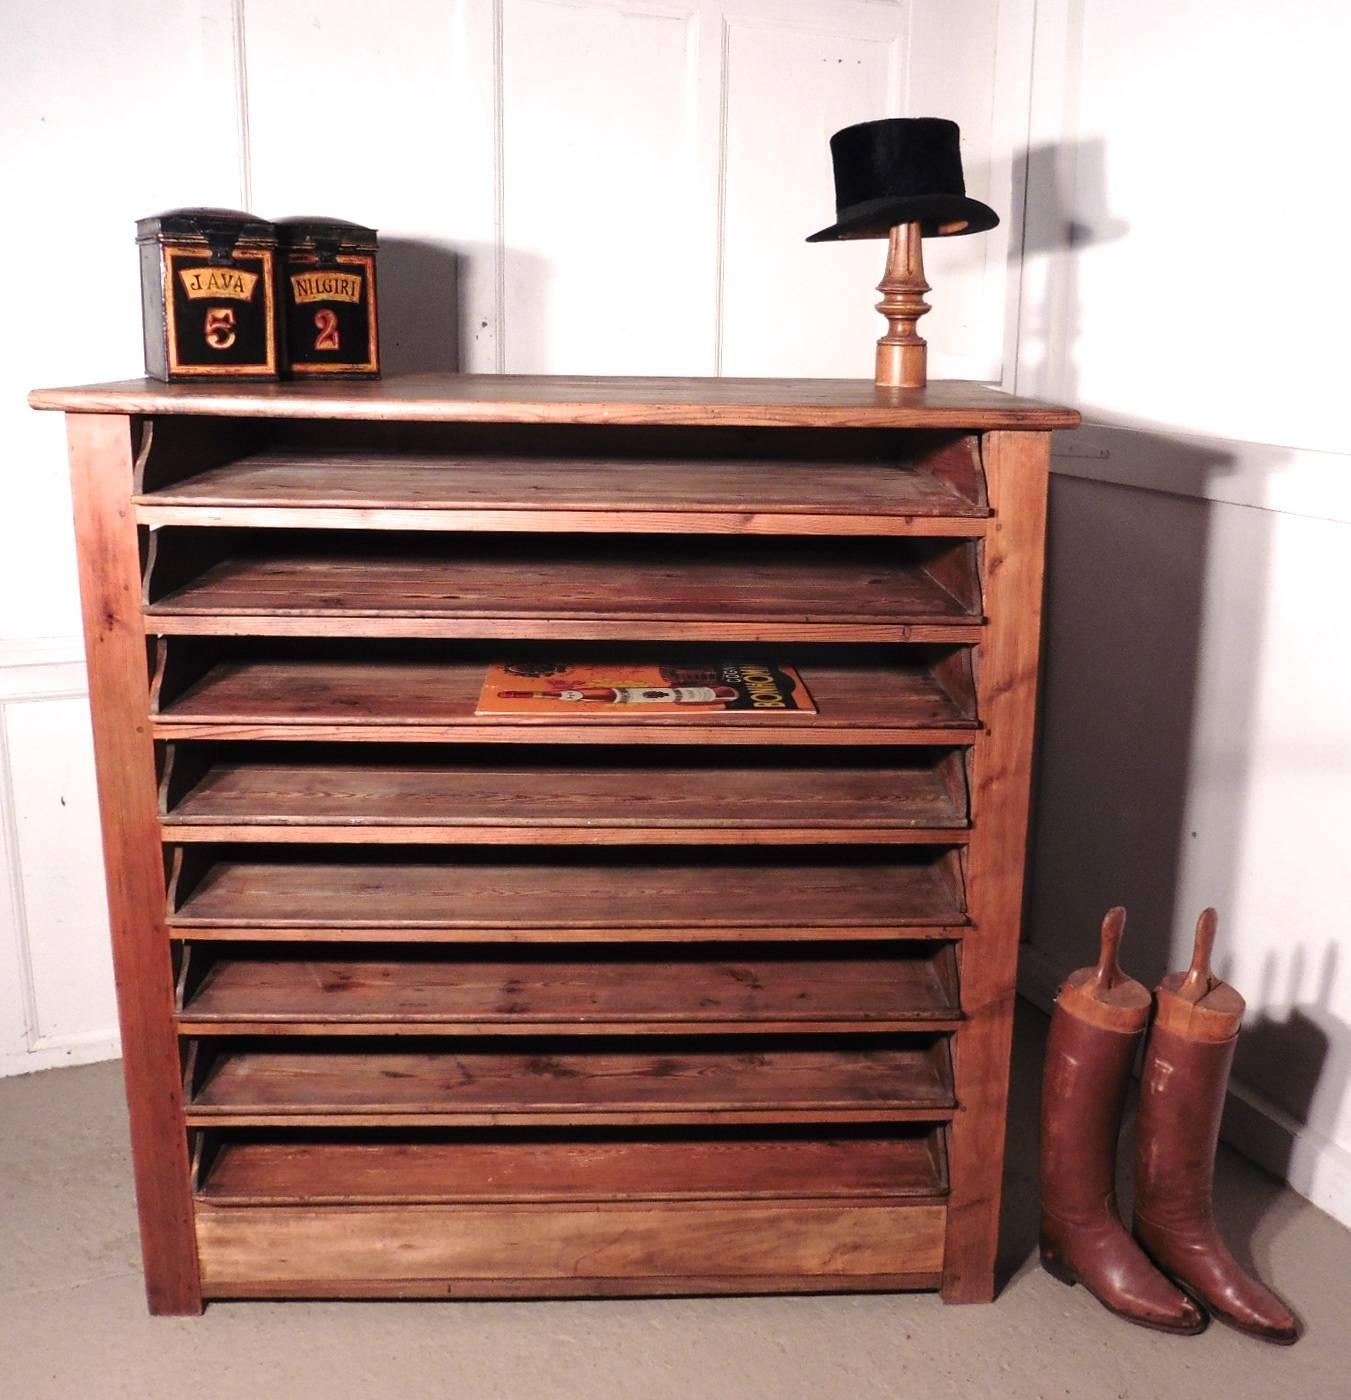 This piece came from an artists studio in France, it has eight large sliding trays or drawers, it is open at the sides and the from which makes it easy to see the contents so it would work well as a shop display piece 
The chest is made in rustic